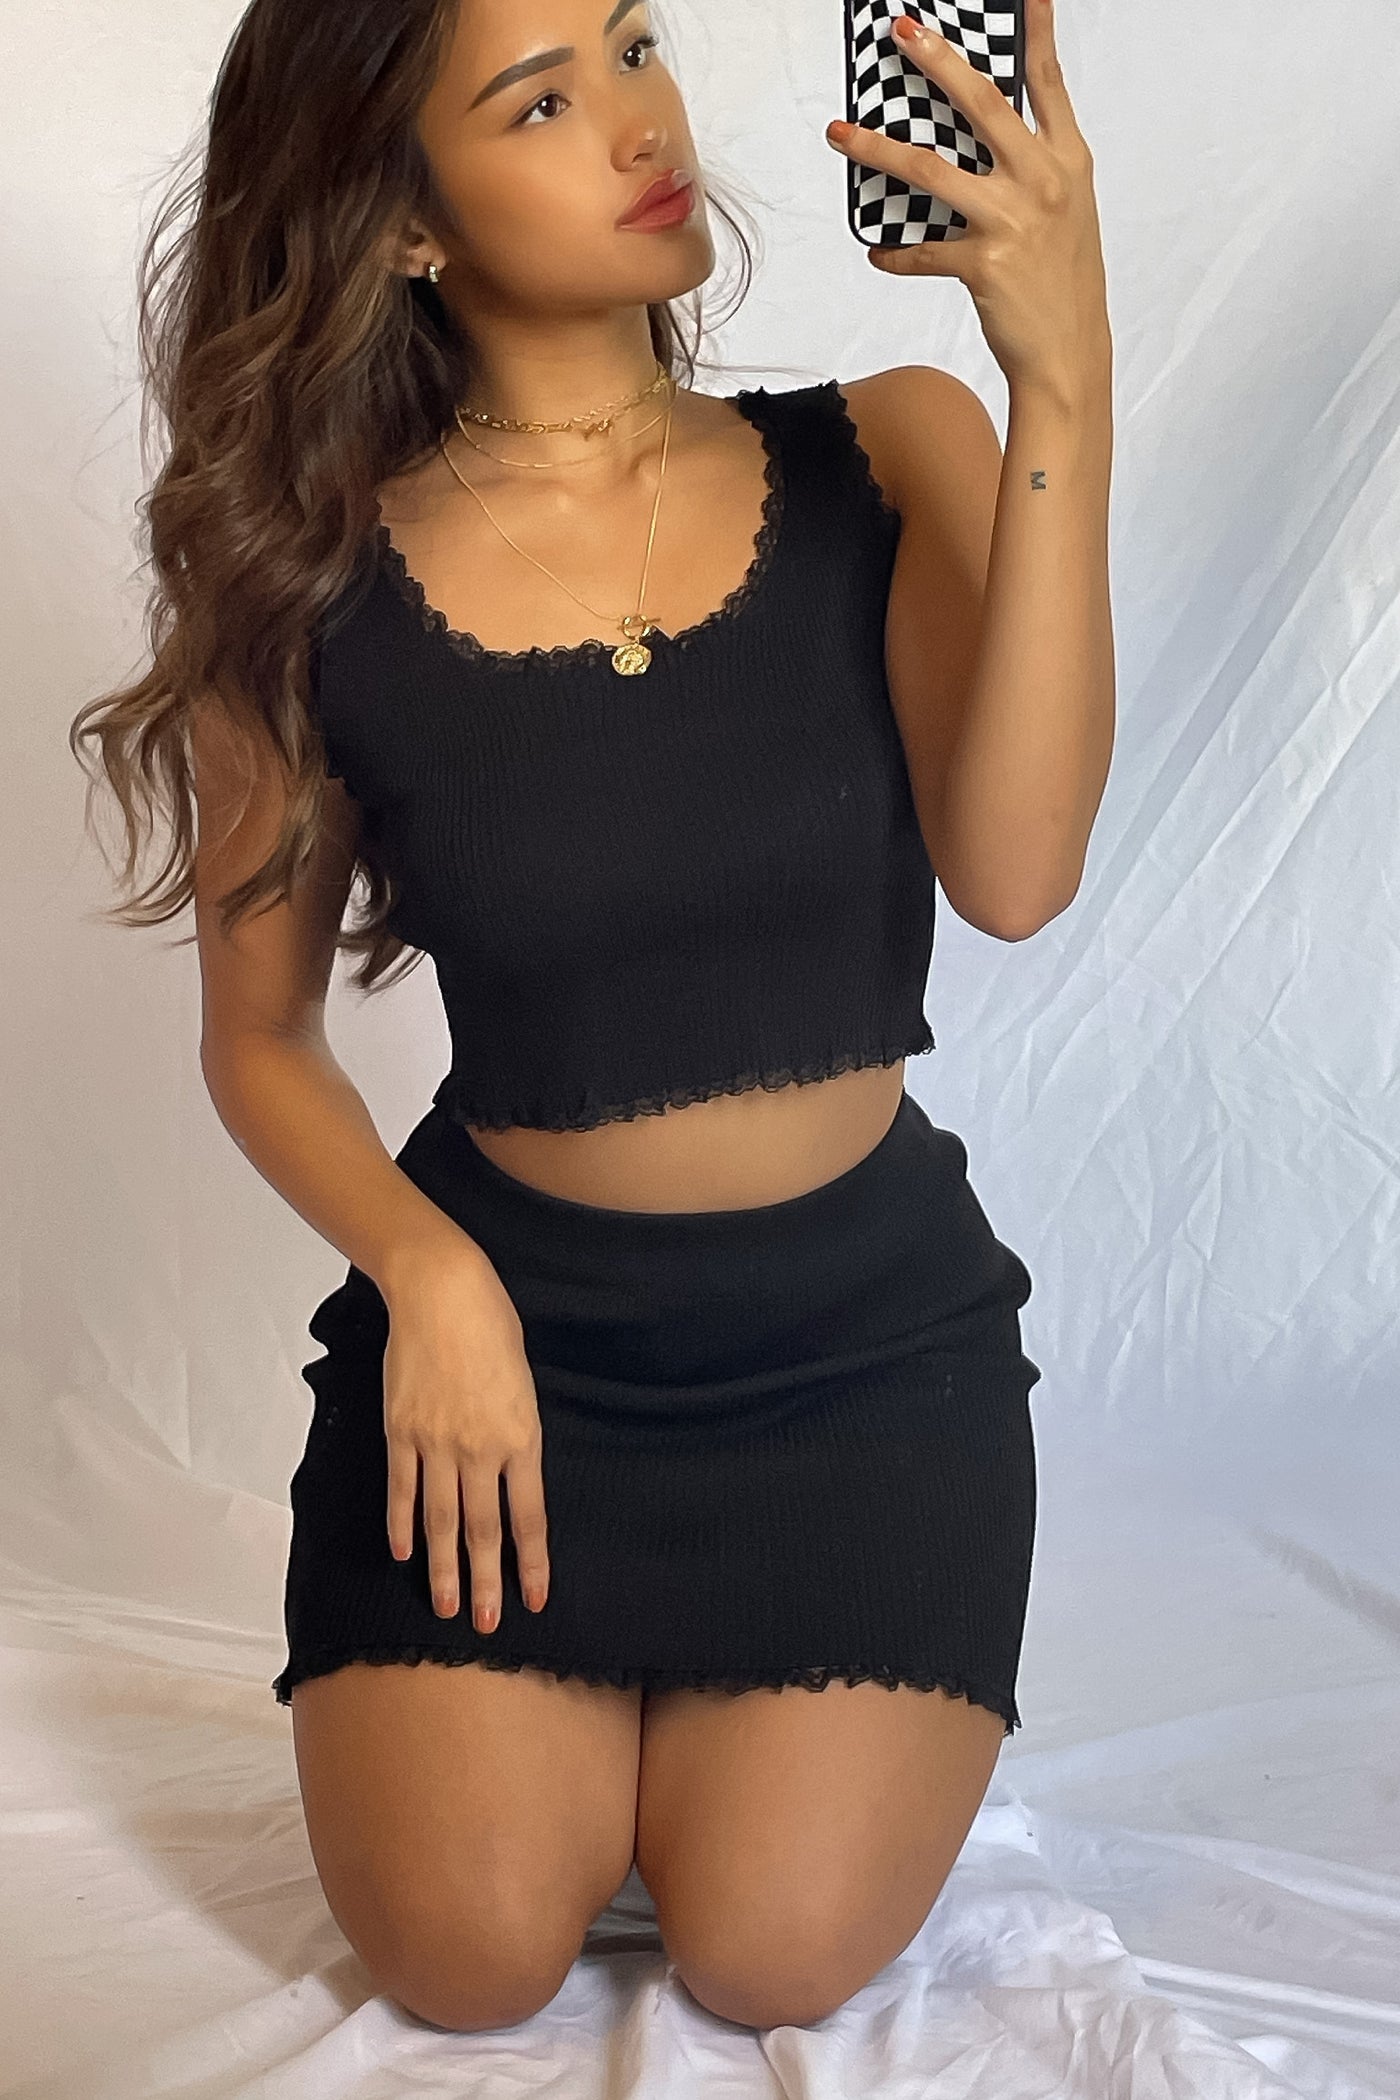 Little White Lies Lace Trimmed Top And Skirt Set - Black